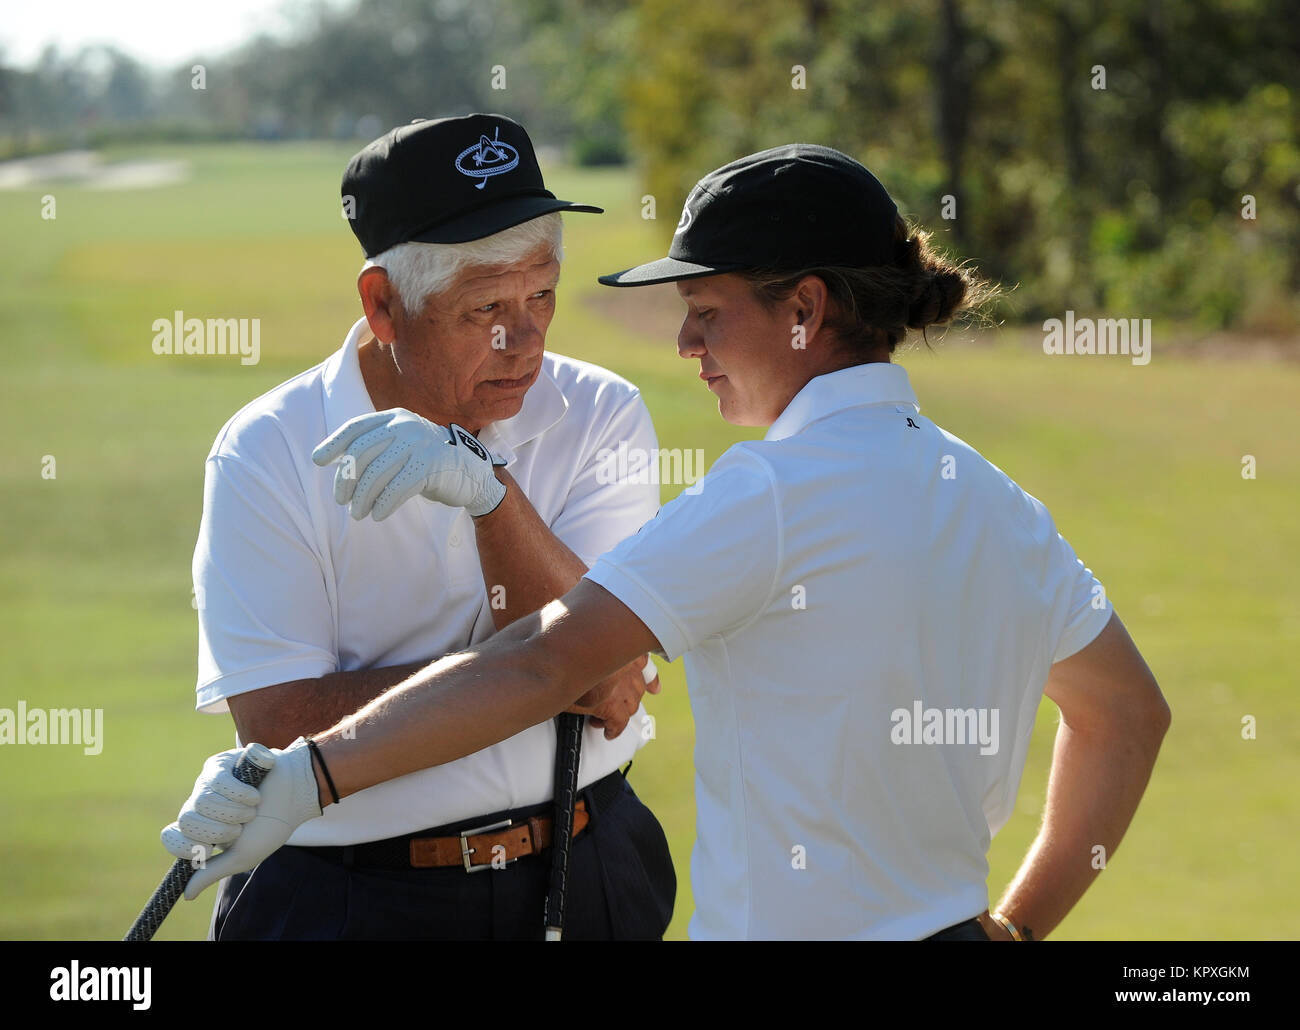 Orlando, United States. 16th Dec, 2017. Lee Trevino (left) chats with his  son, Daniel, before teeing off on the first hole during round one of the  2017 PNC Father Son Challenge golf